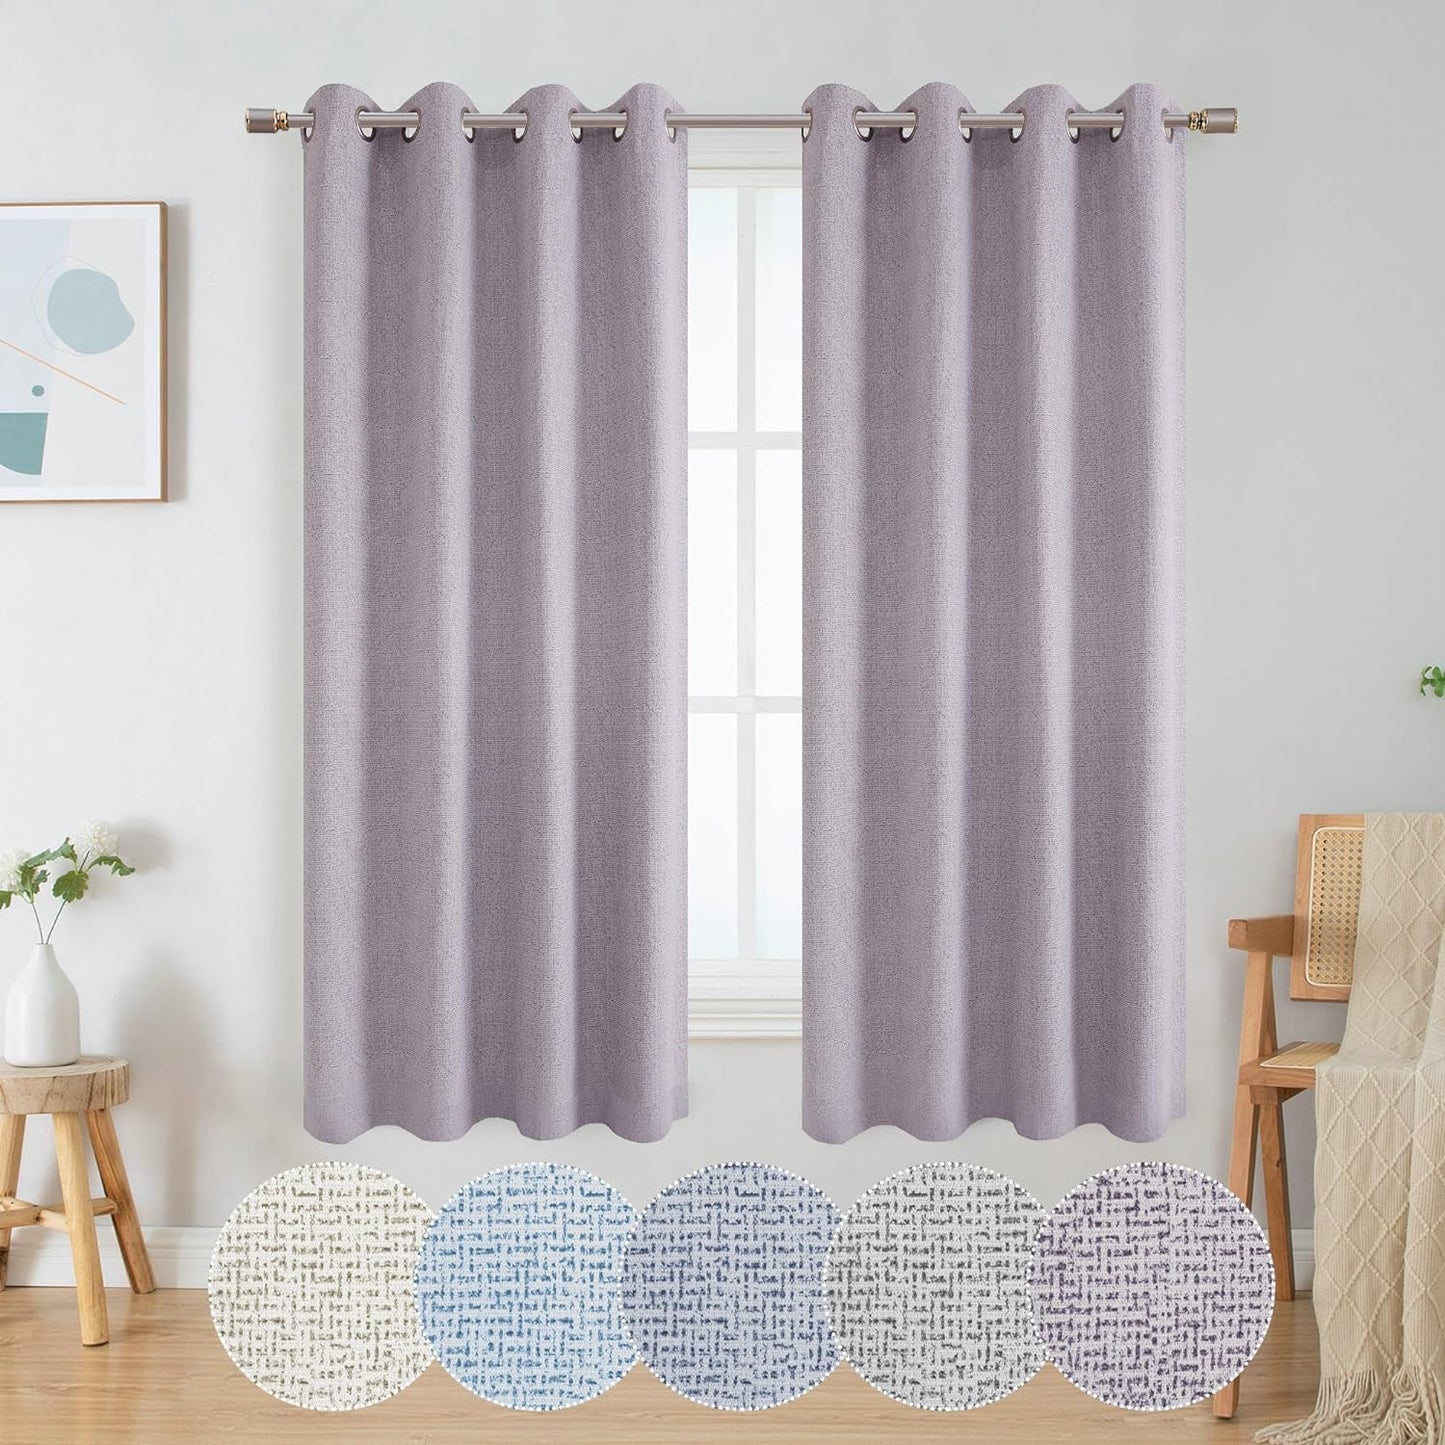 OWENIE Luke Black Out Curtains 63 Inch Long 2 Panels for Bedroom, Geometric Printed Completely Blackout Room Darkening Curtains, Grommet Thermal Insulated Living Room Curtain, 2 PCS, Each 42Wx63L Inch  OWENIE Purple 42"W X 63"L | 2 Pcs 